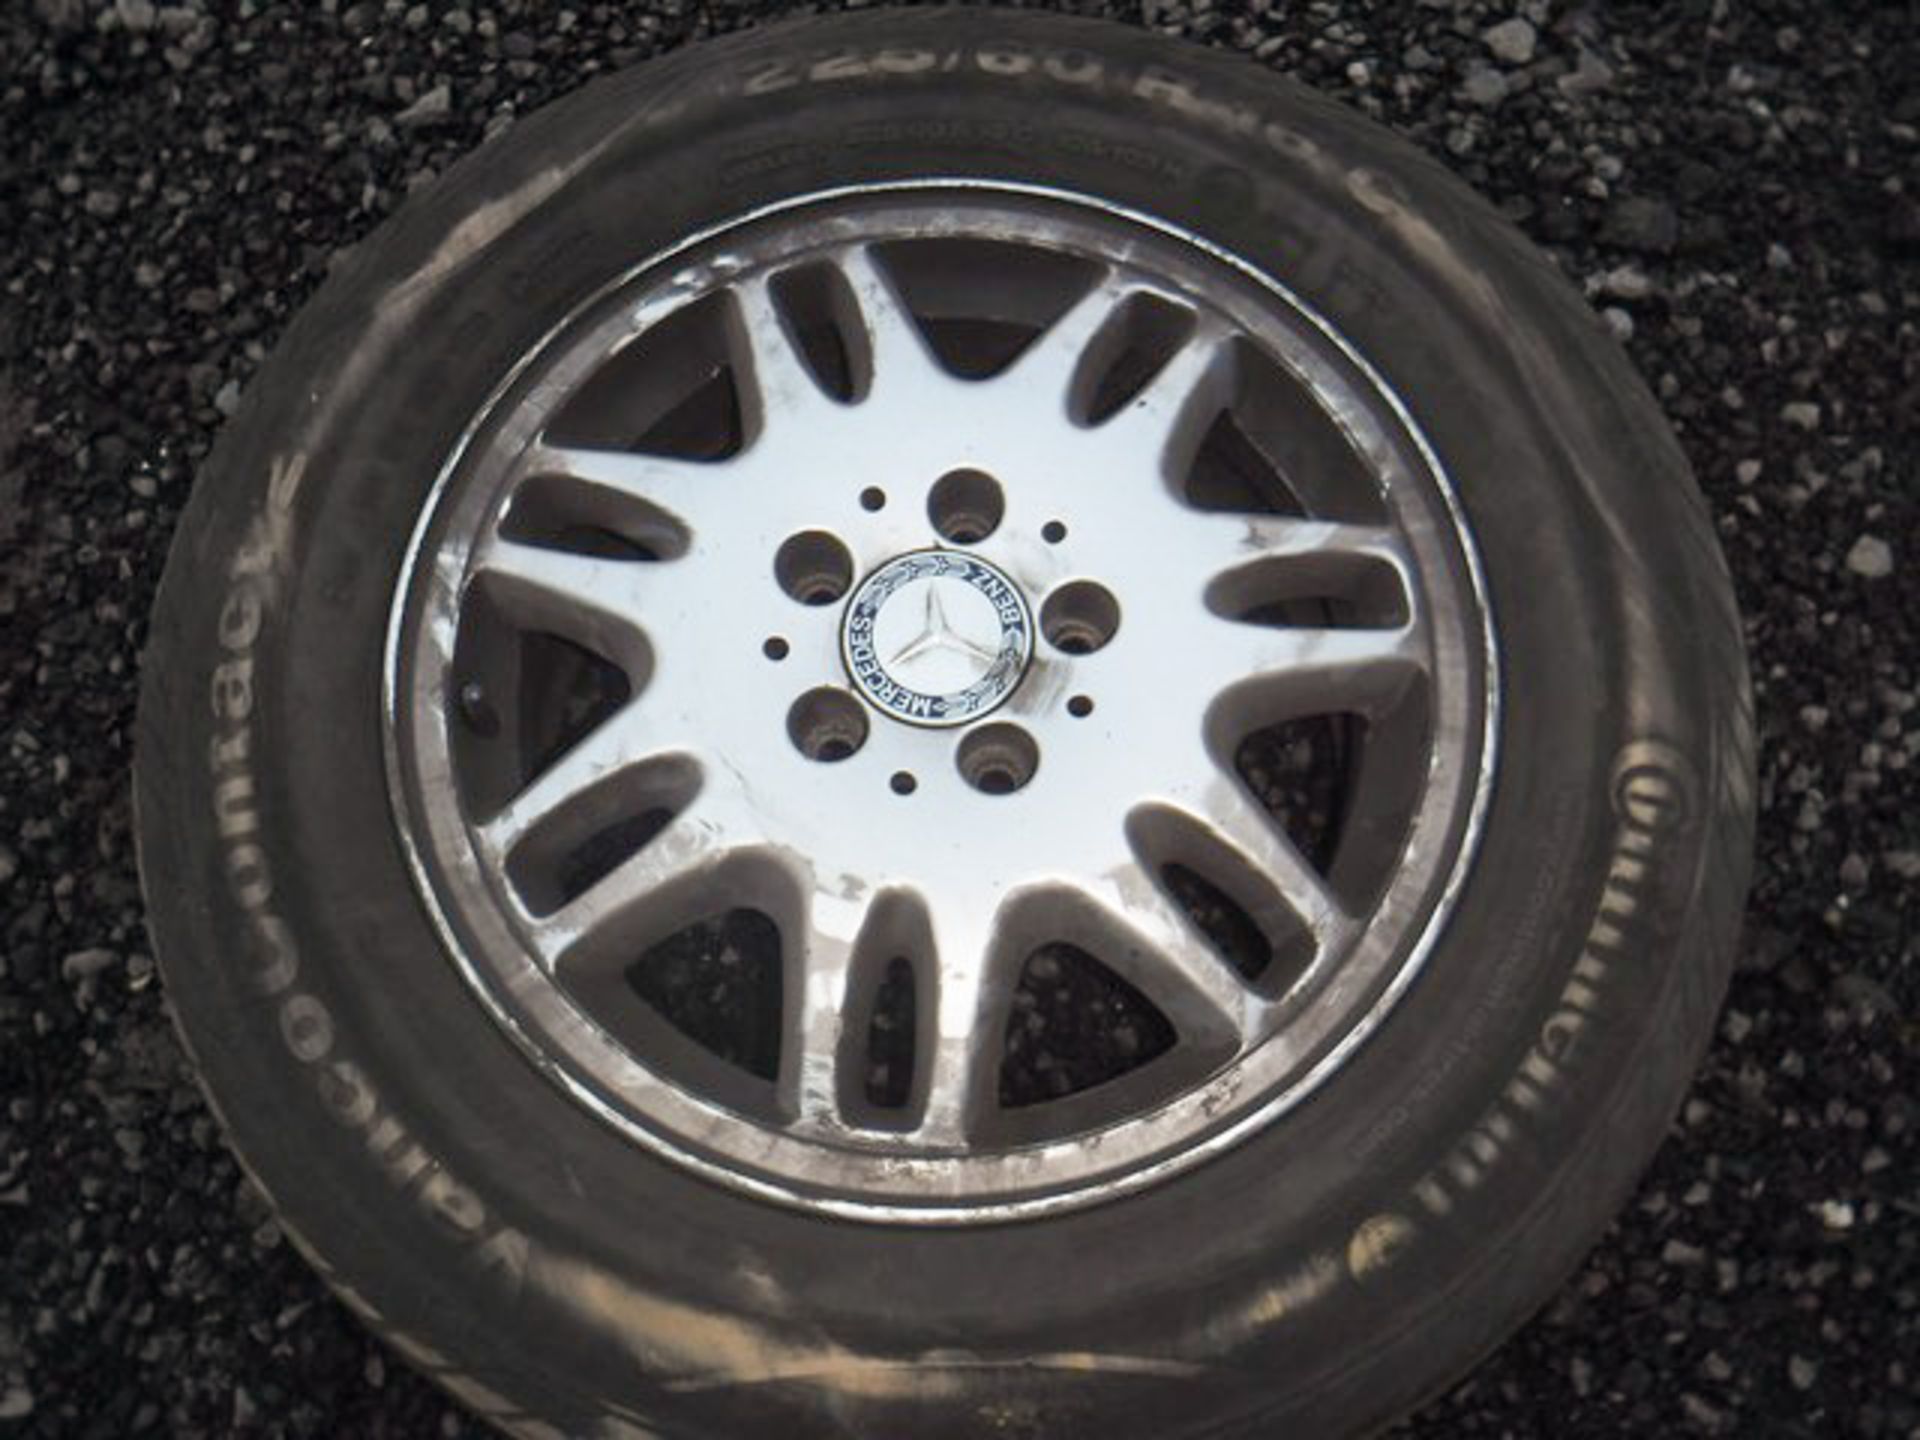 4 X 16" ALLOY WHEELS & 1 SPACE SAVER TO FITMERCEDES VITO - Image 2 of 3